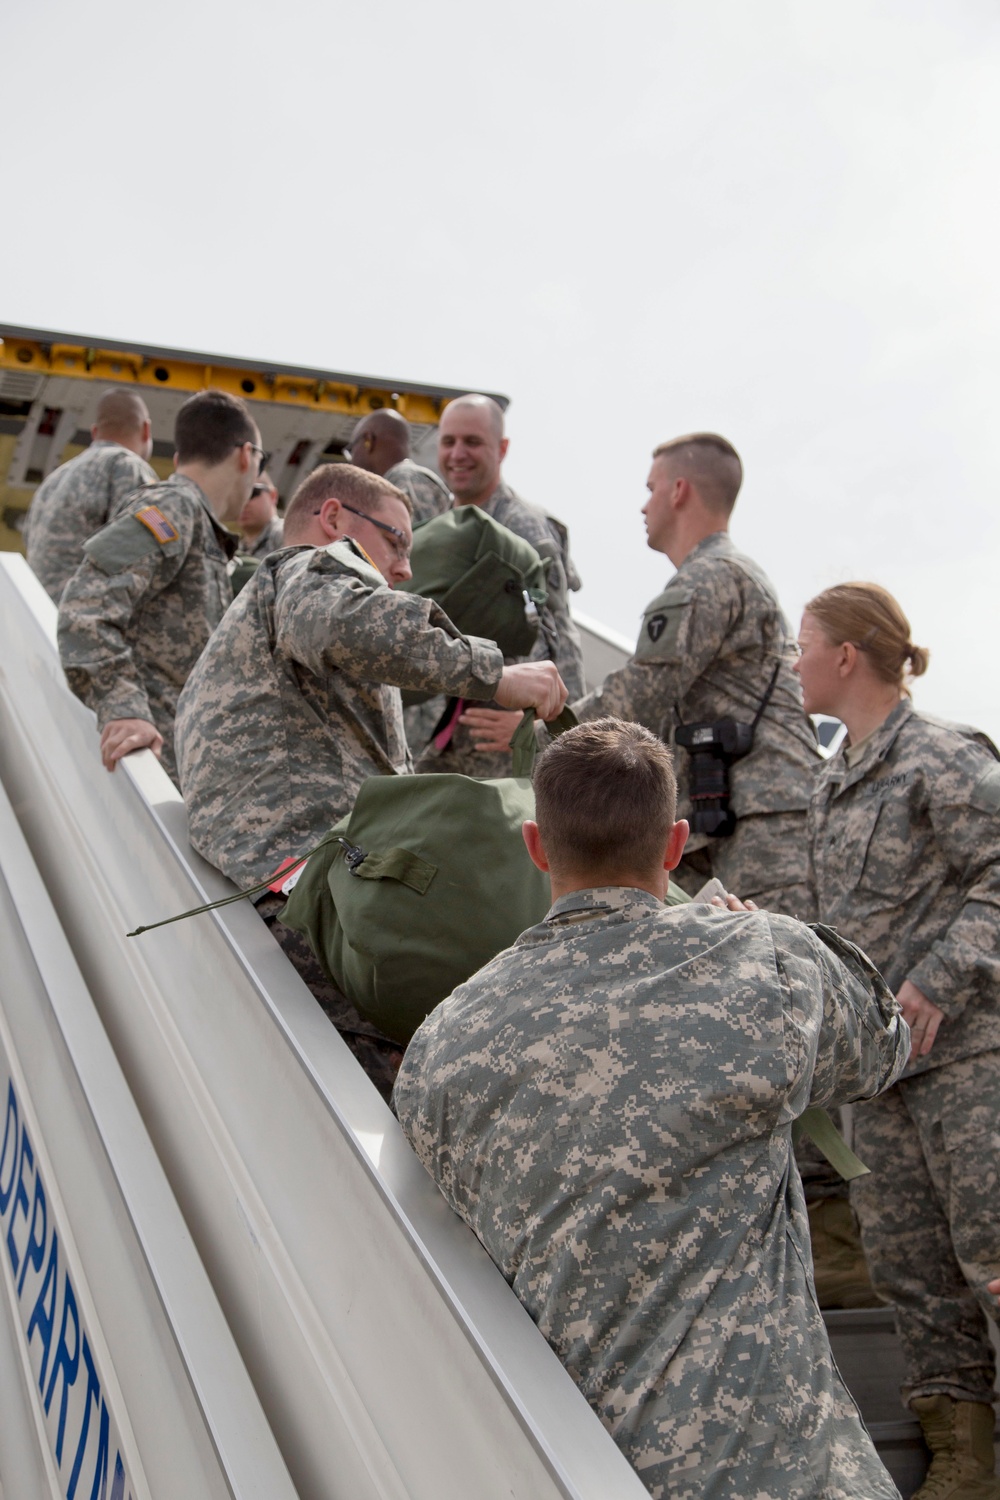 Soldiers arrive in Mongolia for Khaan Quest 2014